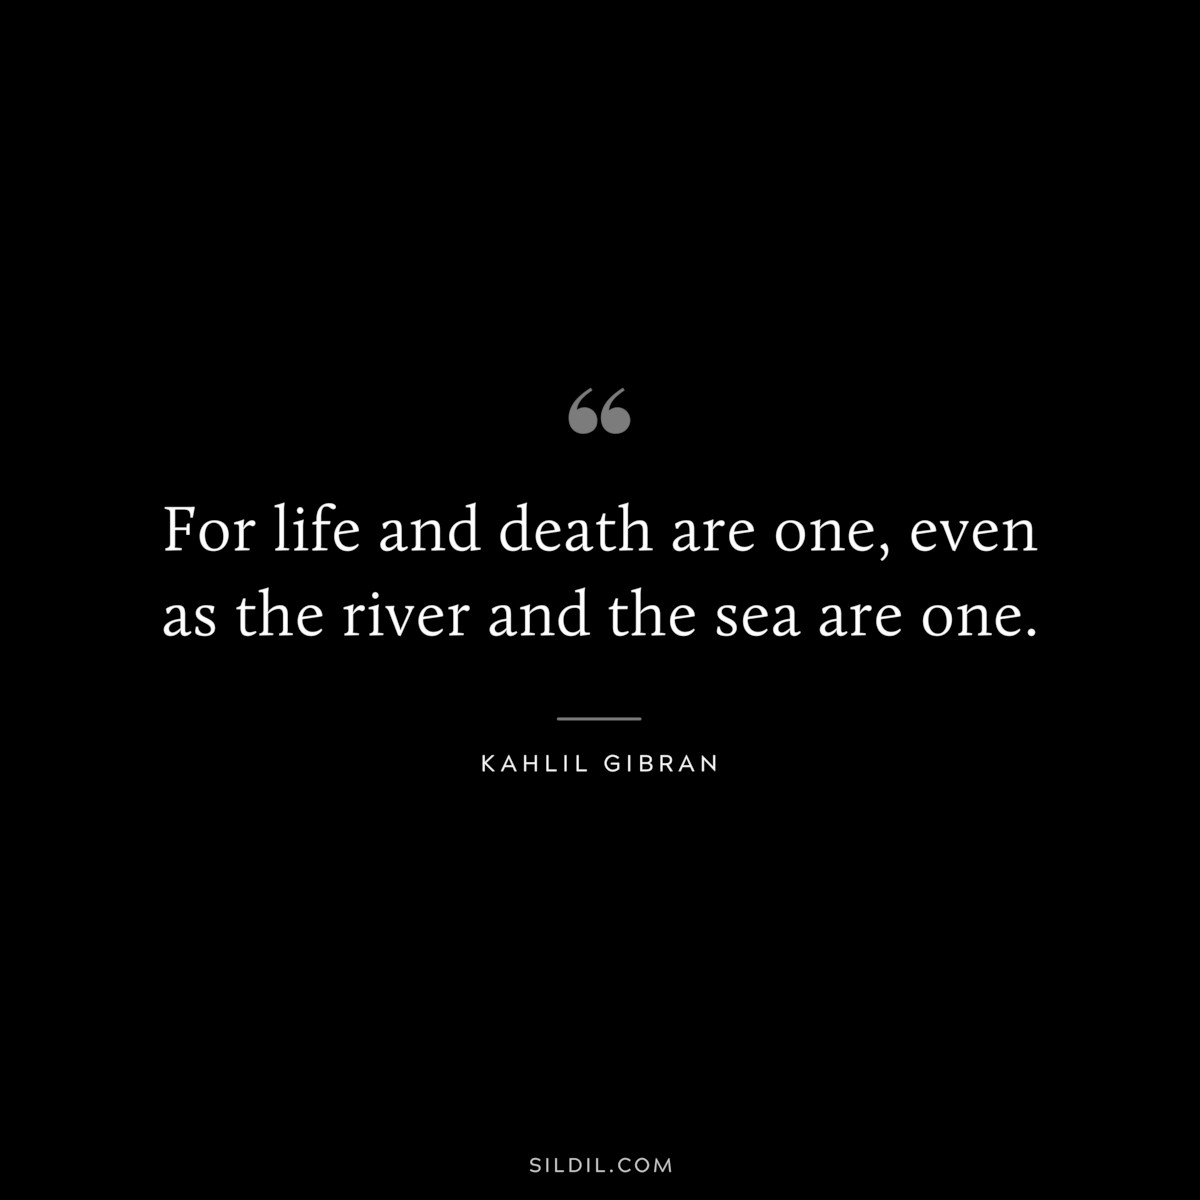 For life and death are one, even as the river and the sea are one. ― Kahlil Gibran